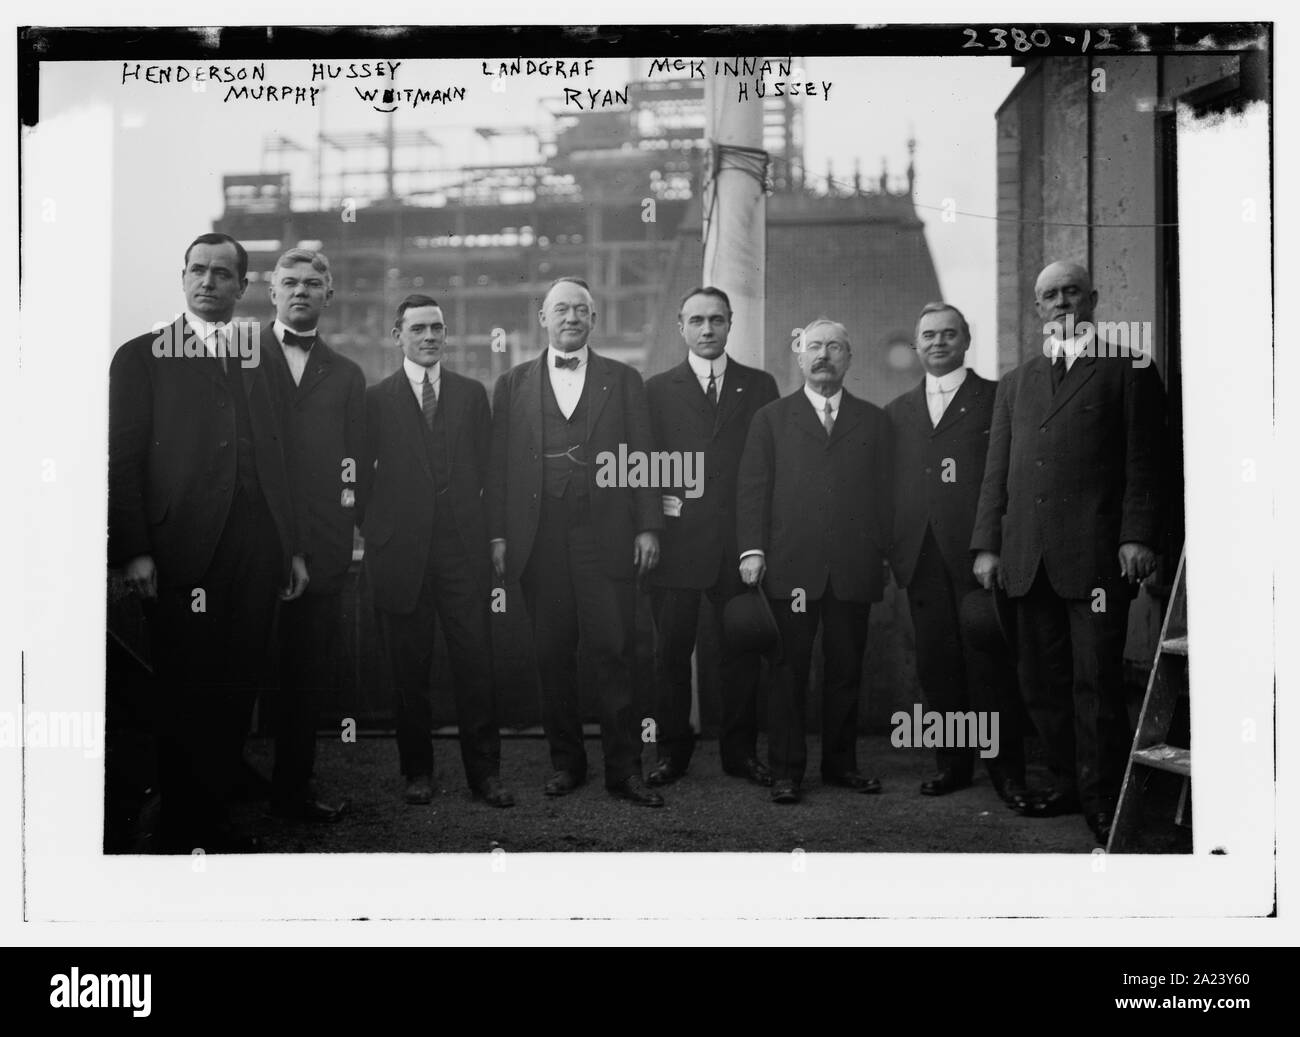 Outlaw League executives: left to right, Marshall Henderson, co-owner Pittsburgh; William T. Murphy, owner Cleveland; Ambrose Hussey Jr., co-owner, Brooklyn; William A. Witman, first league president and owner, Reading; Ernest C. Landgraf, co-owner, Richmond; John J. Ryan, co-owner Cincinnati; Hugh Mckinnon, co-owner, Cincinnati; Ambrose Hussey Sr., co-owner Brooklyn (baseball0 Stock Photo